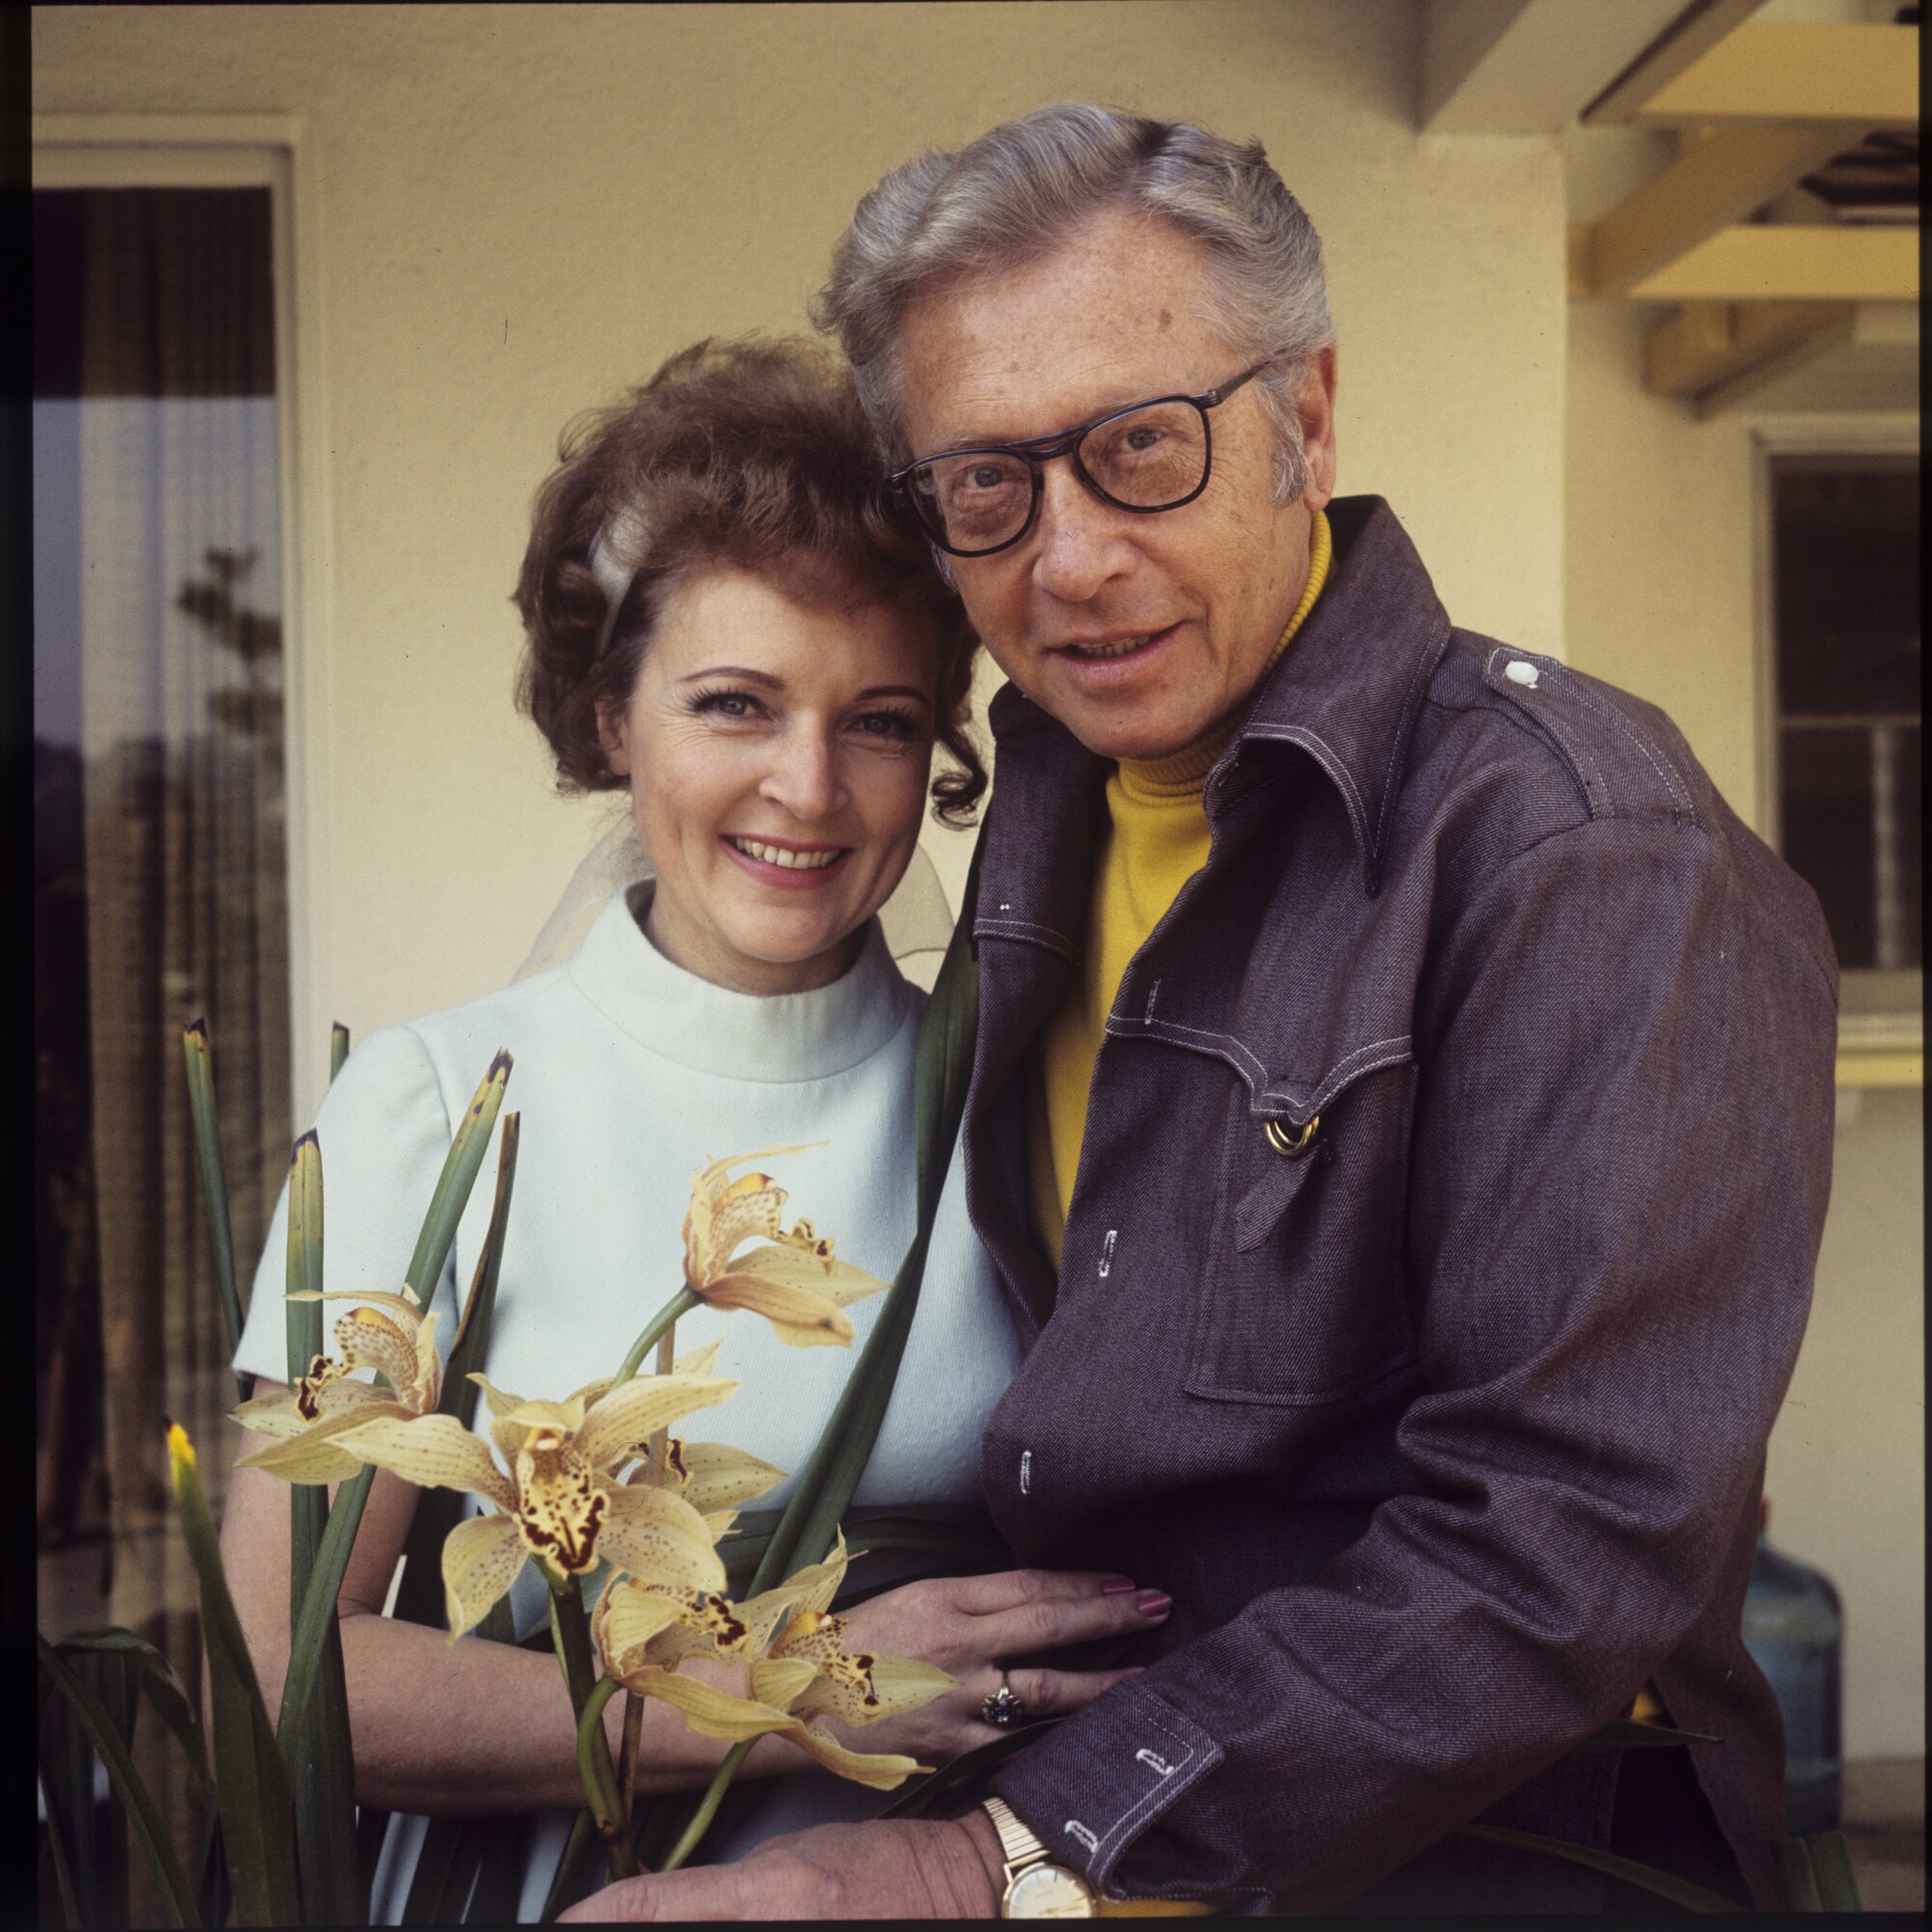 Allen Ludden and Betty White were married for 18 years before he died of cancer at 63 in 1981. She never remarried.